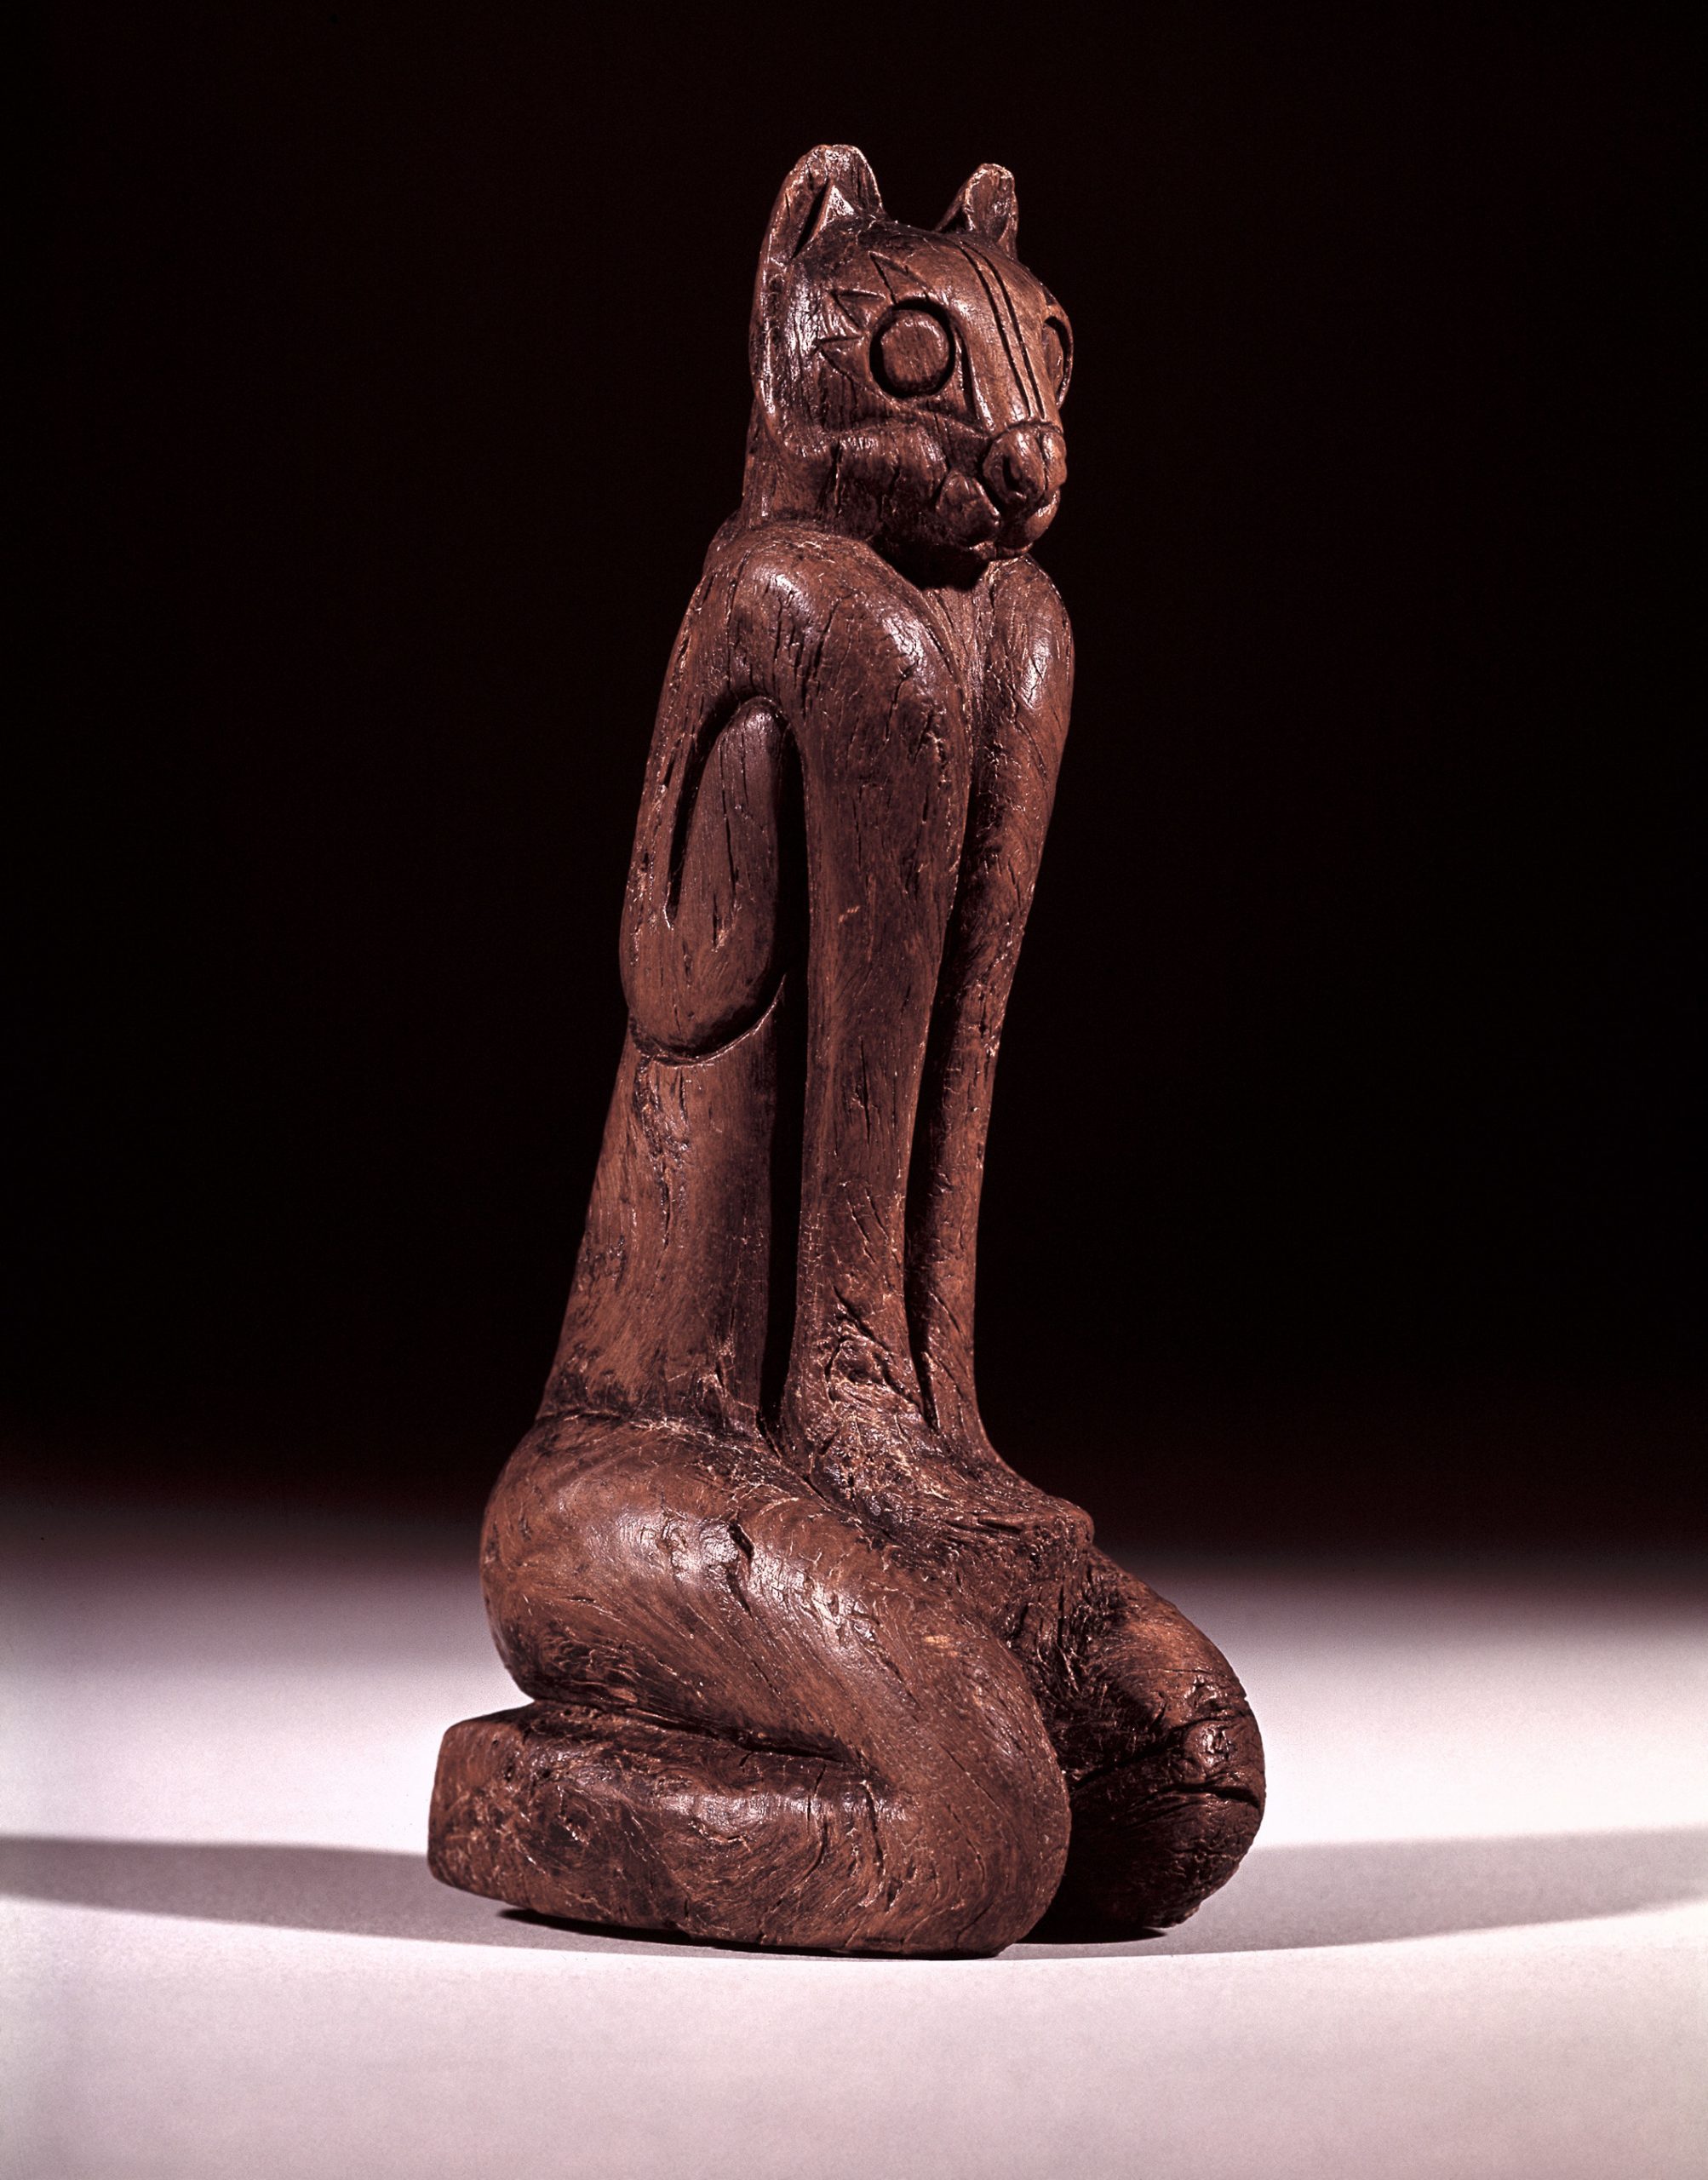 The Key Marco Cat — one of the finest pieces of pre-Columbian Native American art ever discovered in North America — is on exhibit at the Marco Island Historical Museum through 2026. Photo credit: Courtesy of Department of Anthropology, Smithsonian Institution (A240915)